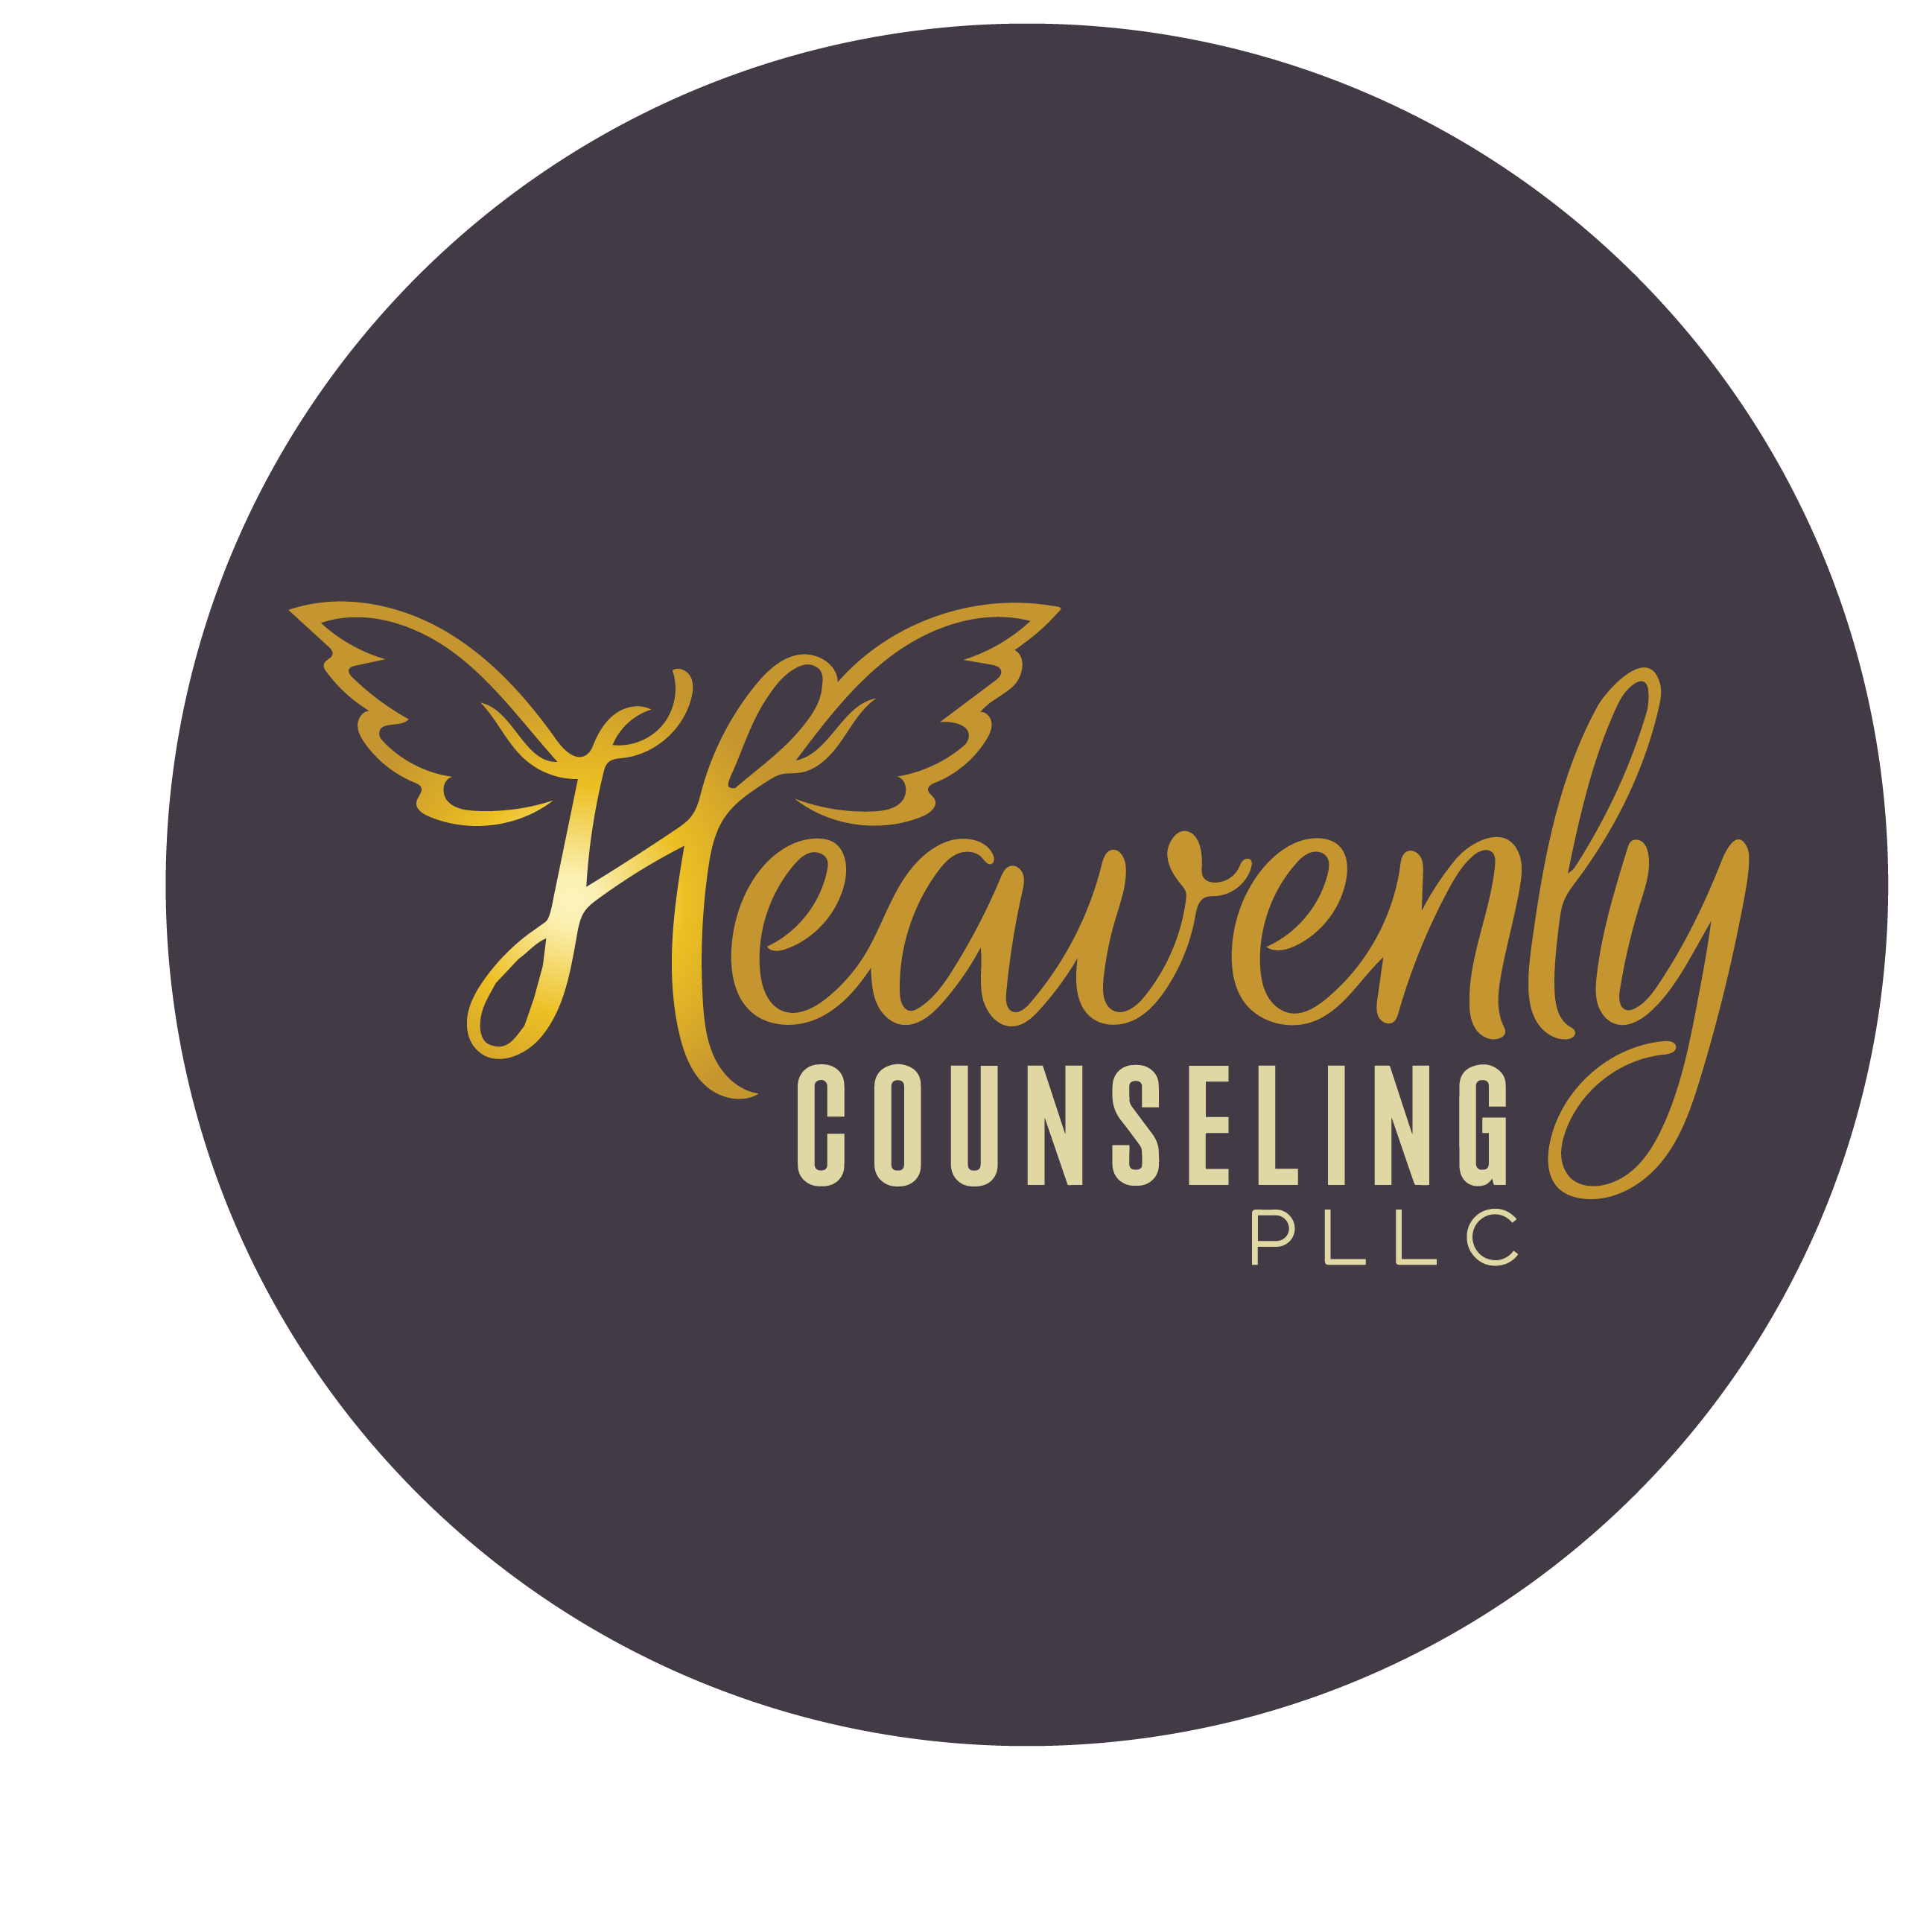 Heavenly Counseling PLLC logo